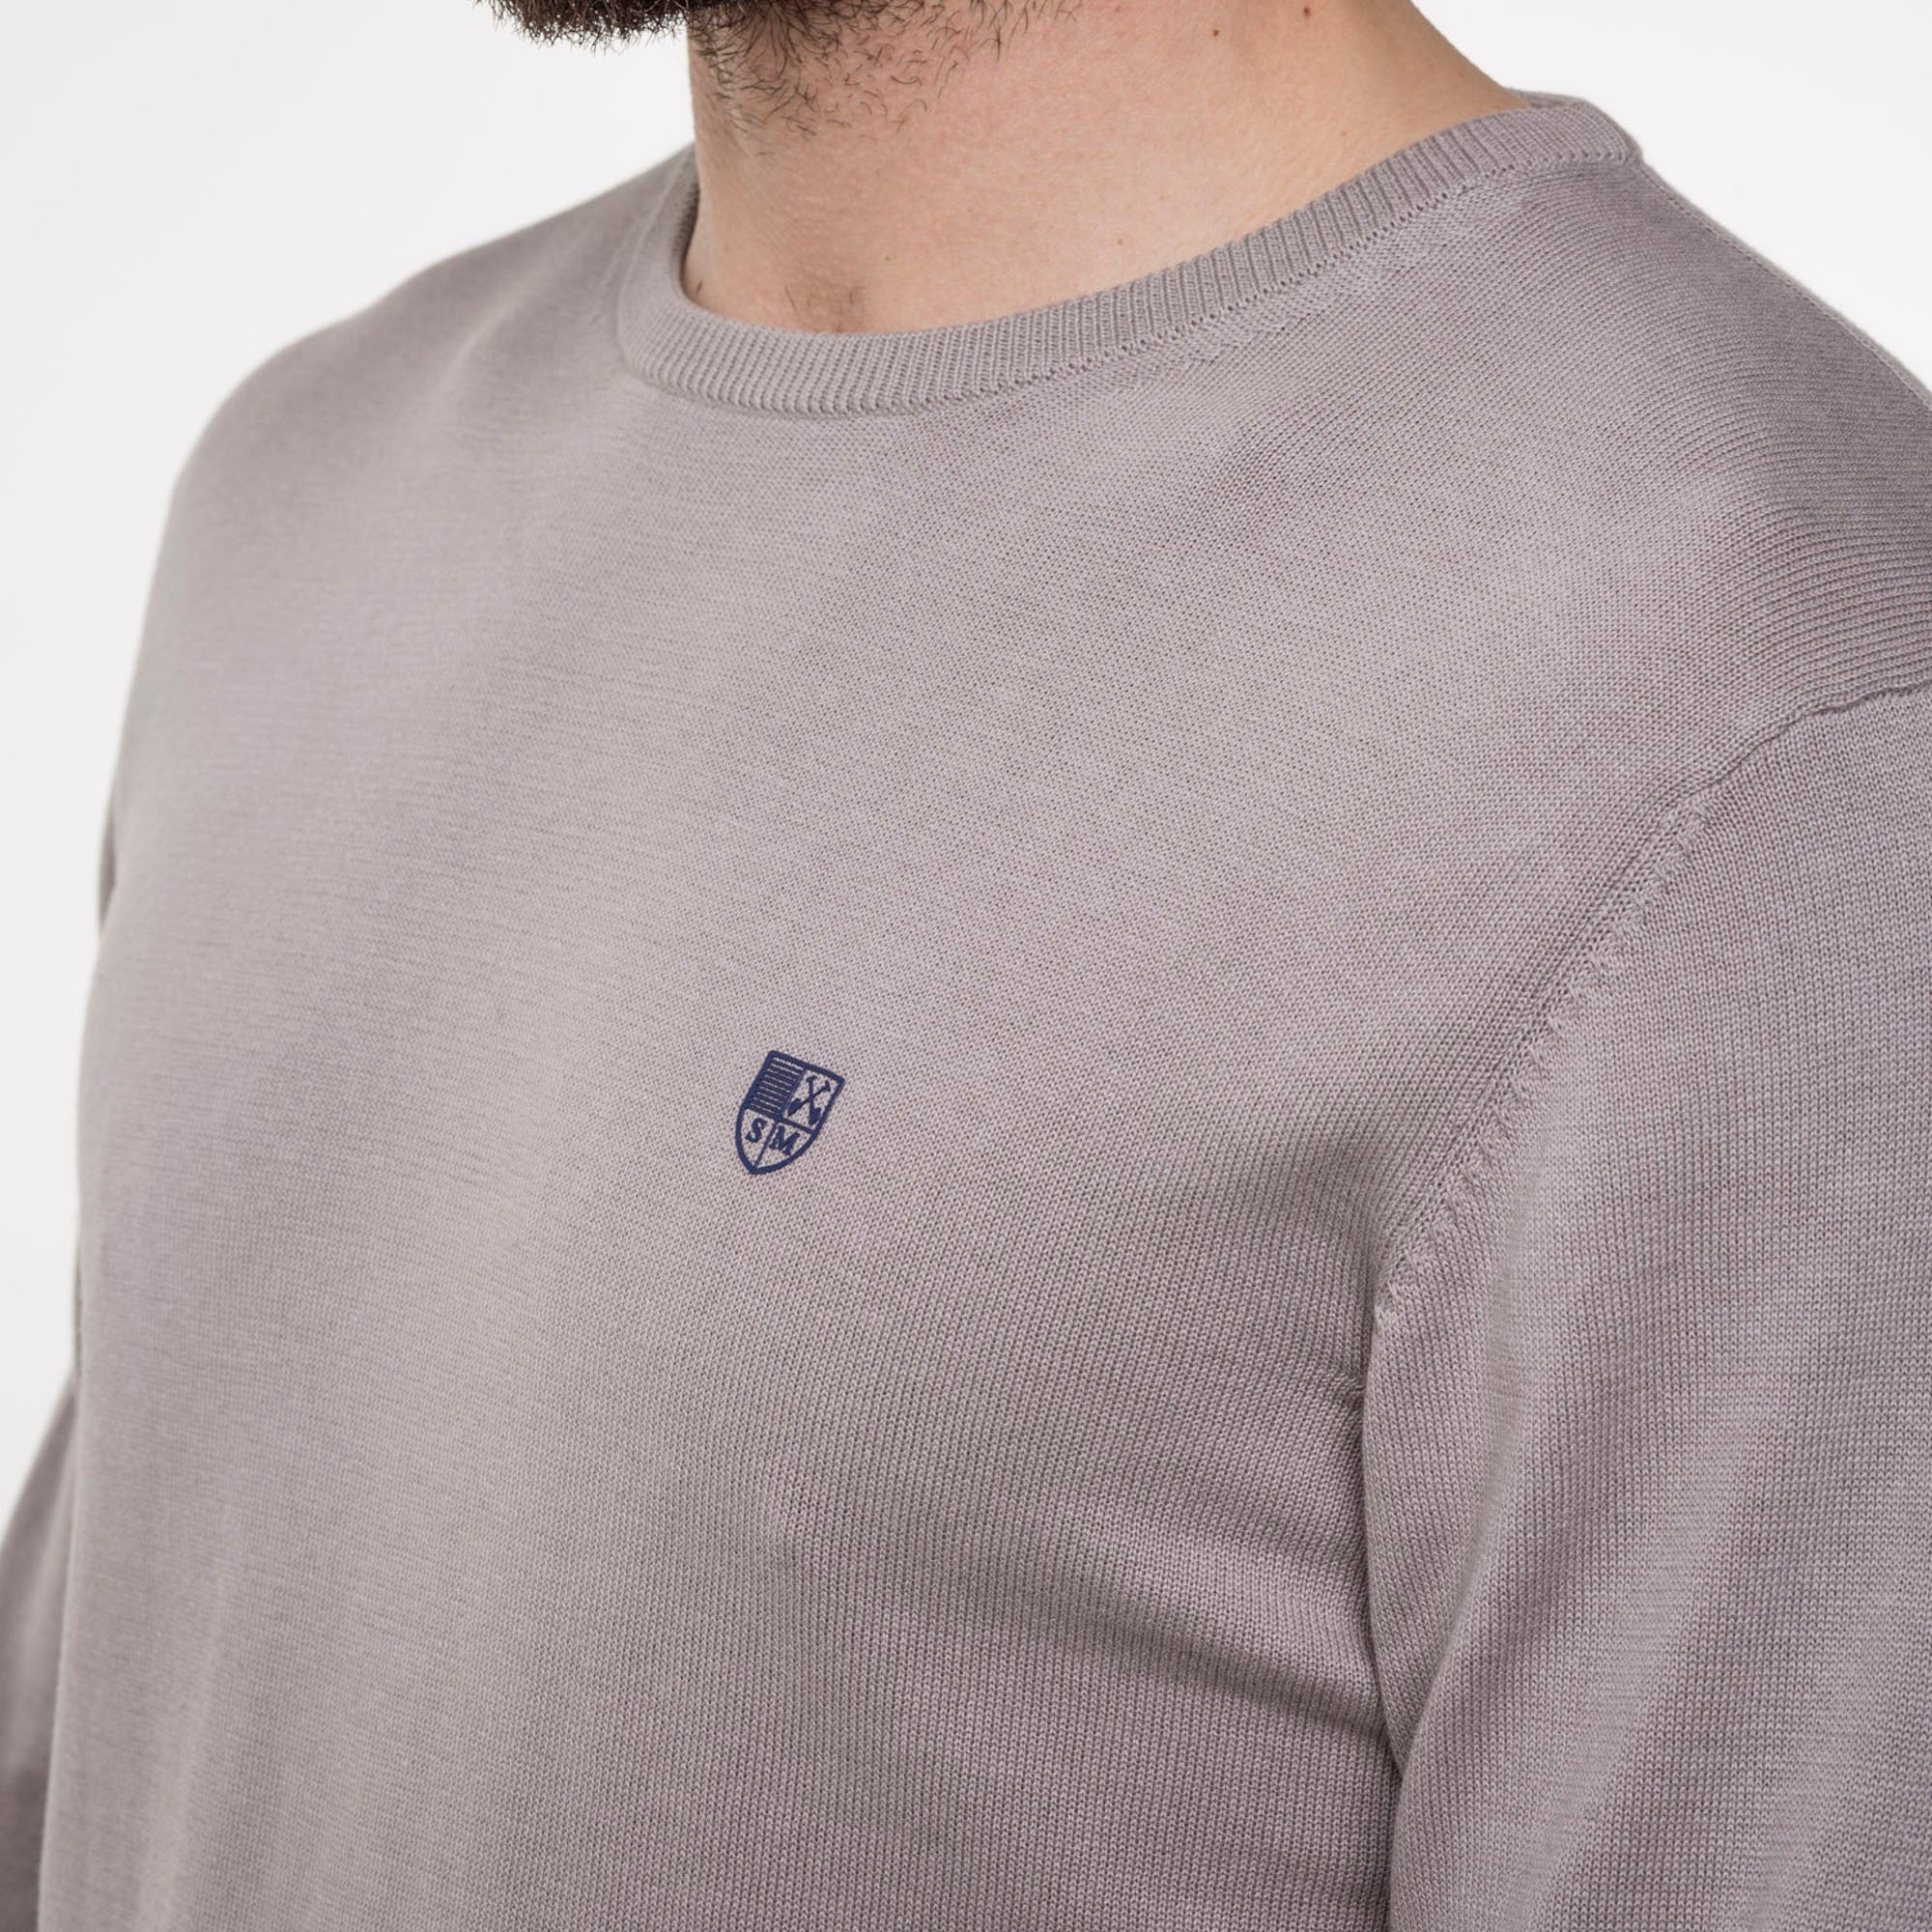 12 gauge crew neck with logo print on the heart side